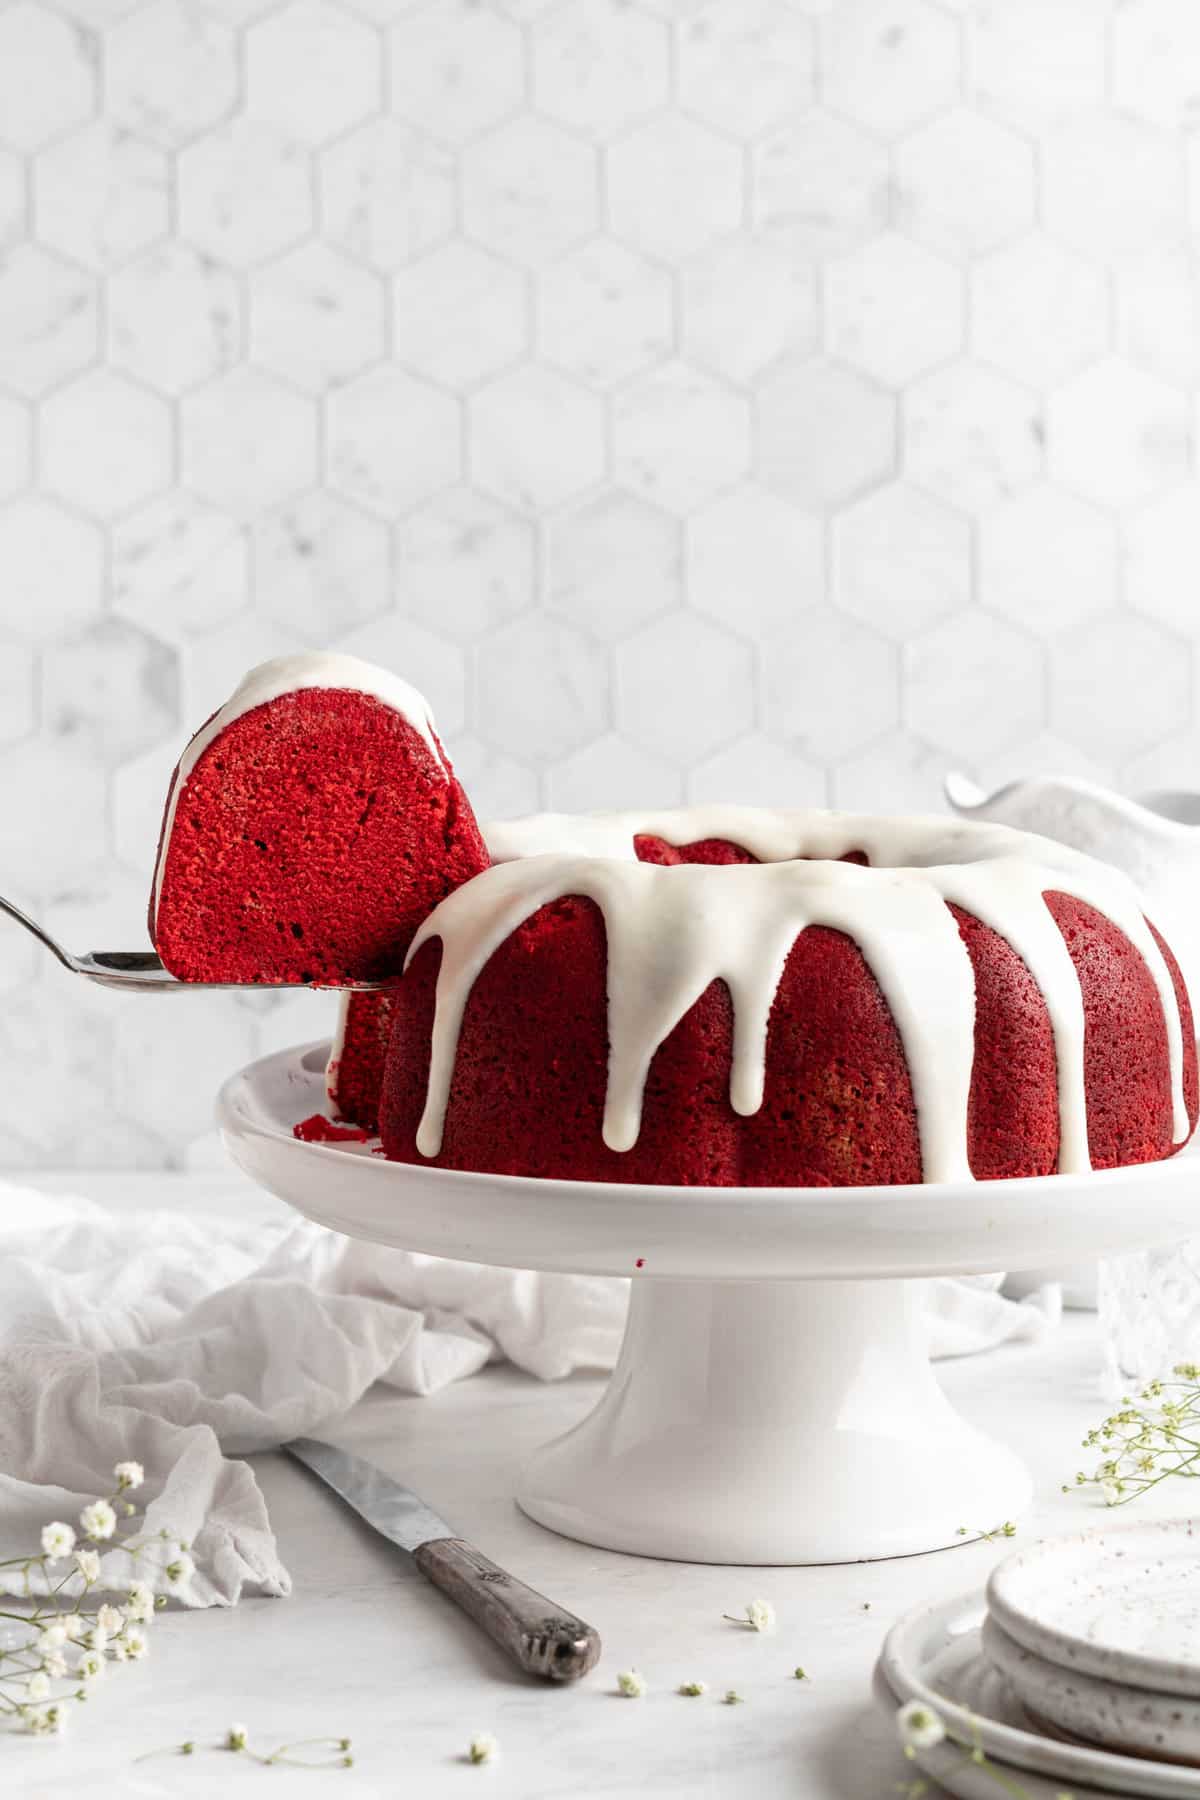 15 Tips for the Best Bundt Cakes Straight from Our Test Kitchen